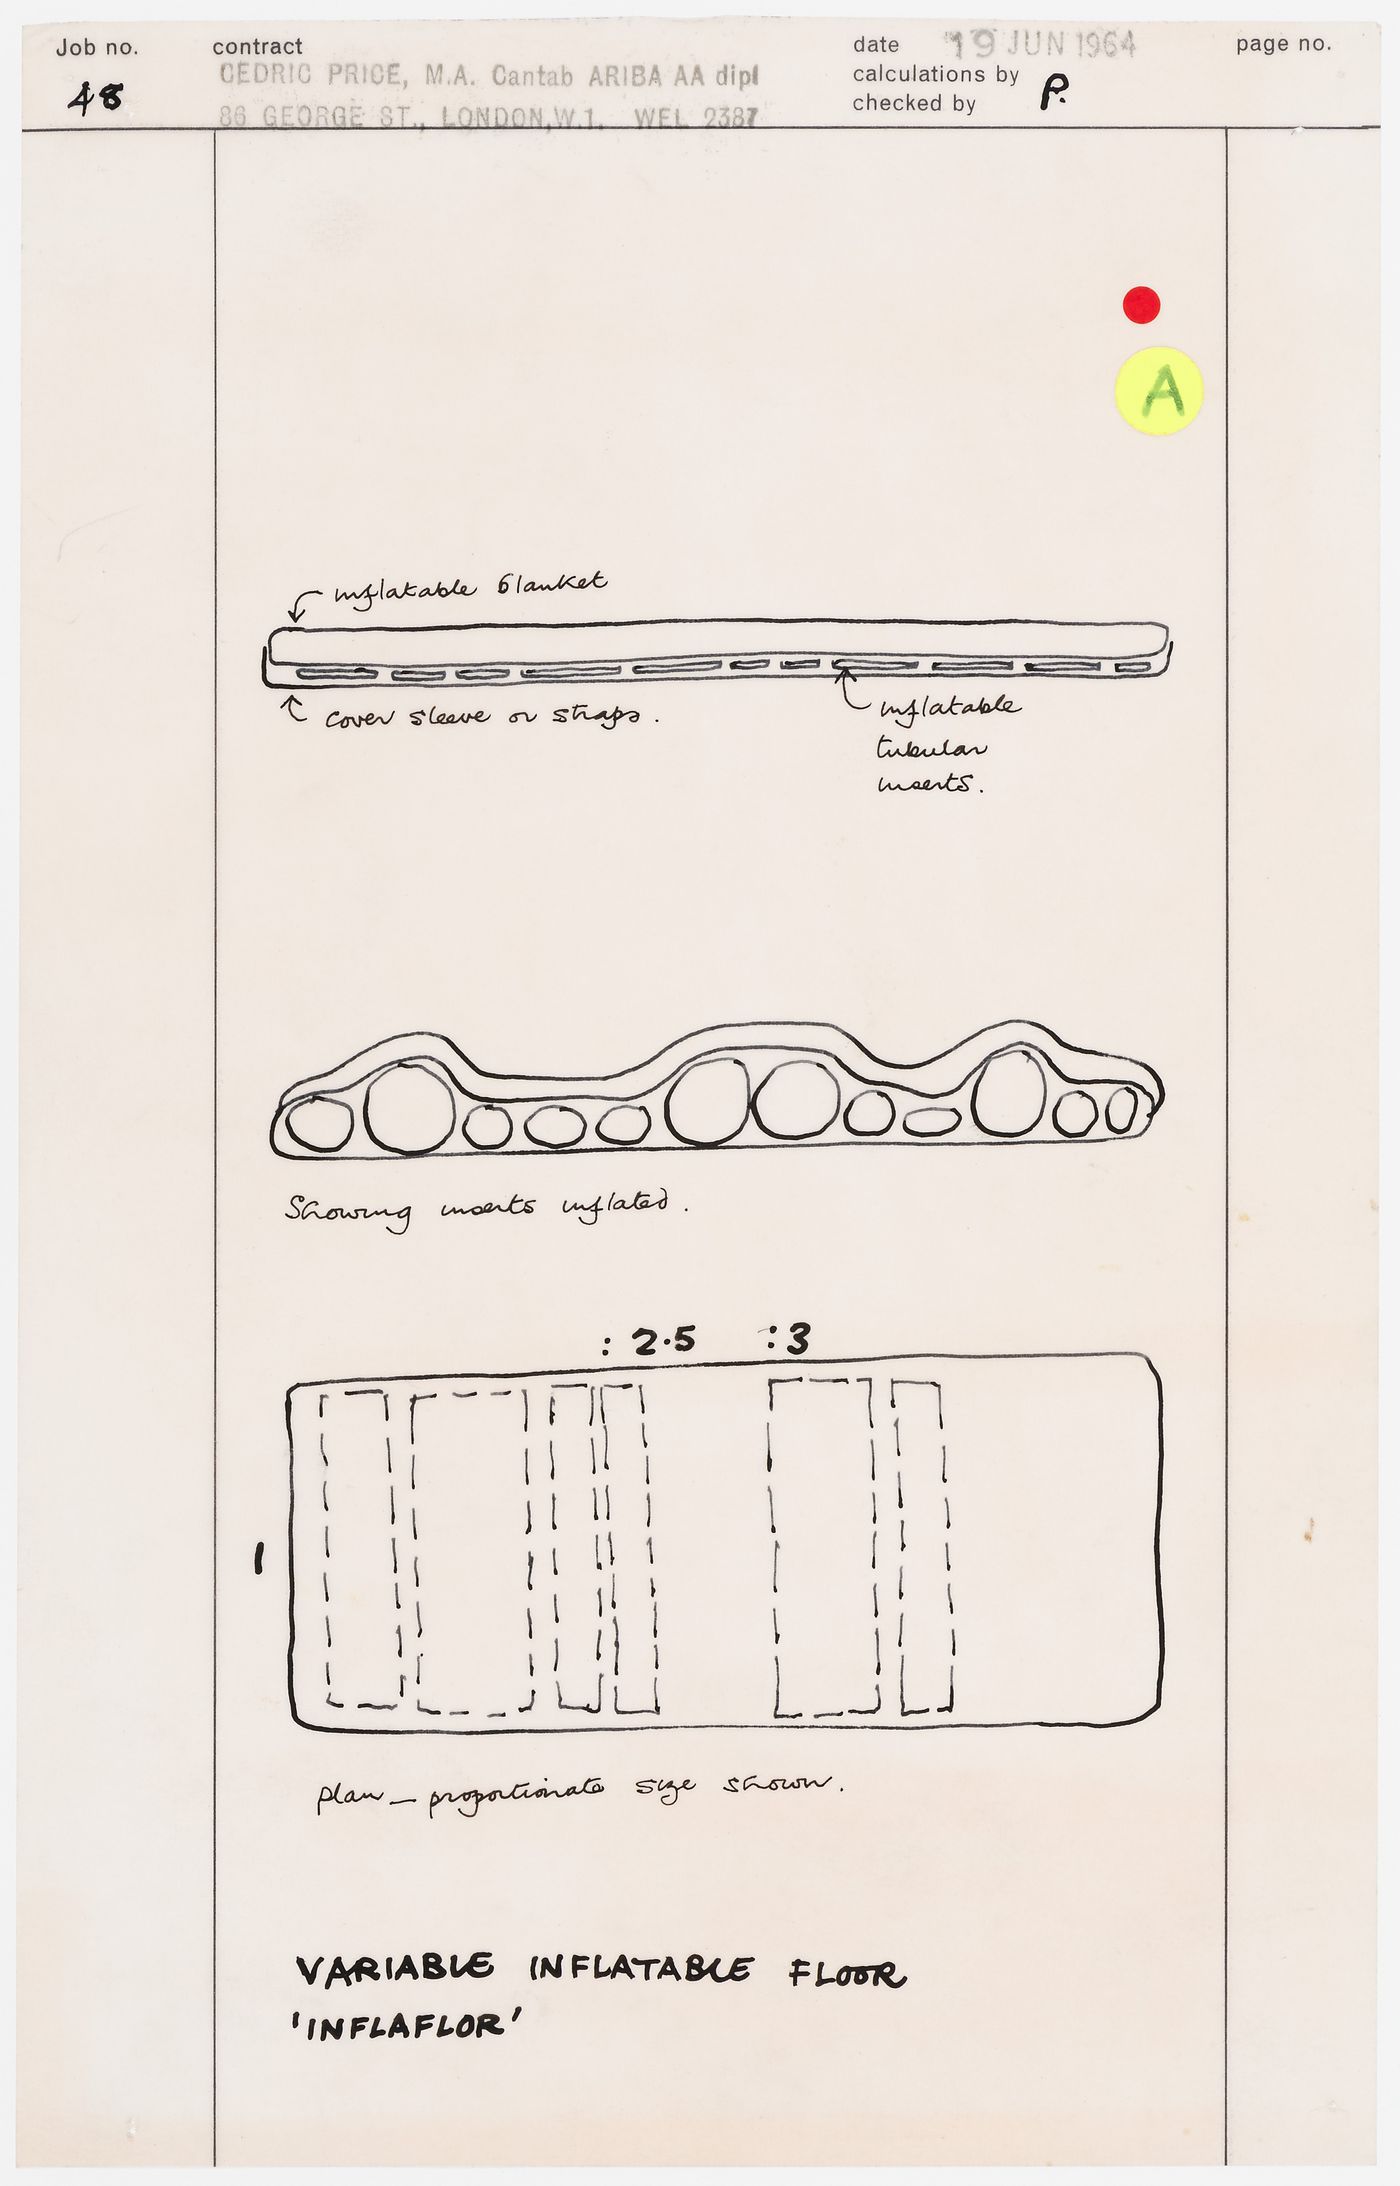 Sections and plan for variable inflatable floor, "Inflaflor"